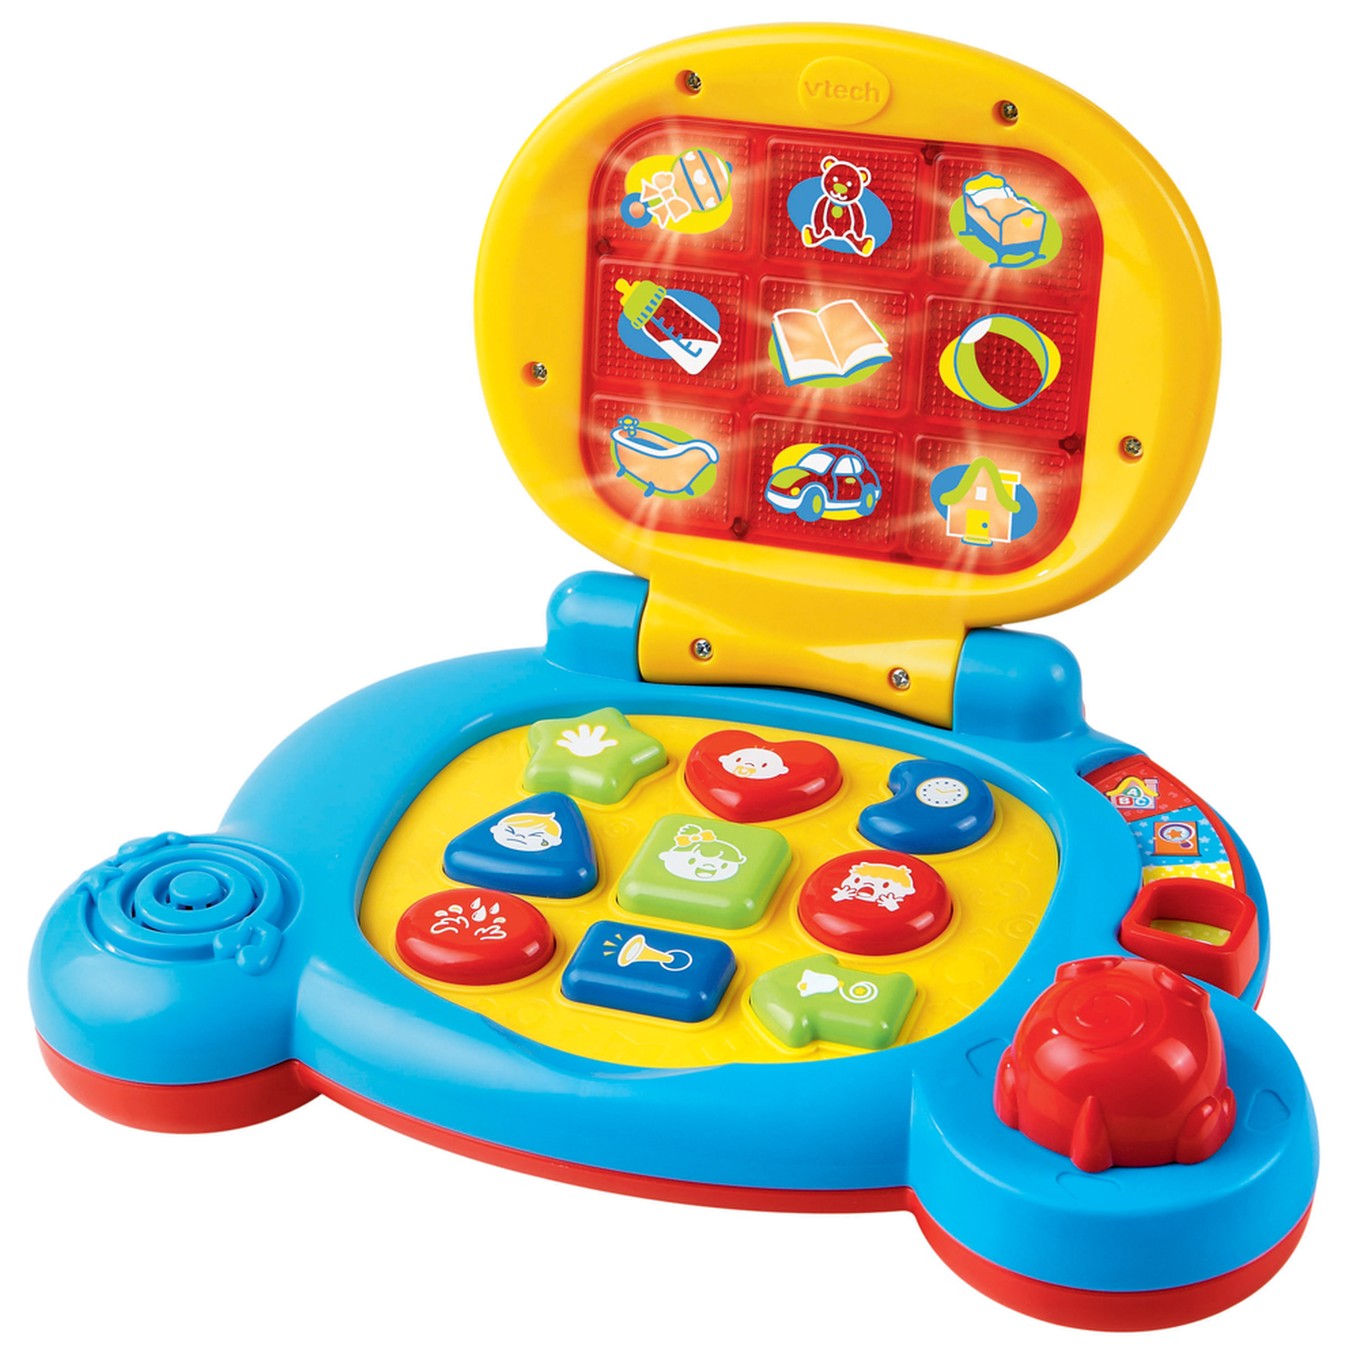 vtech learning computer